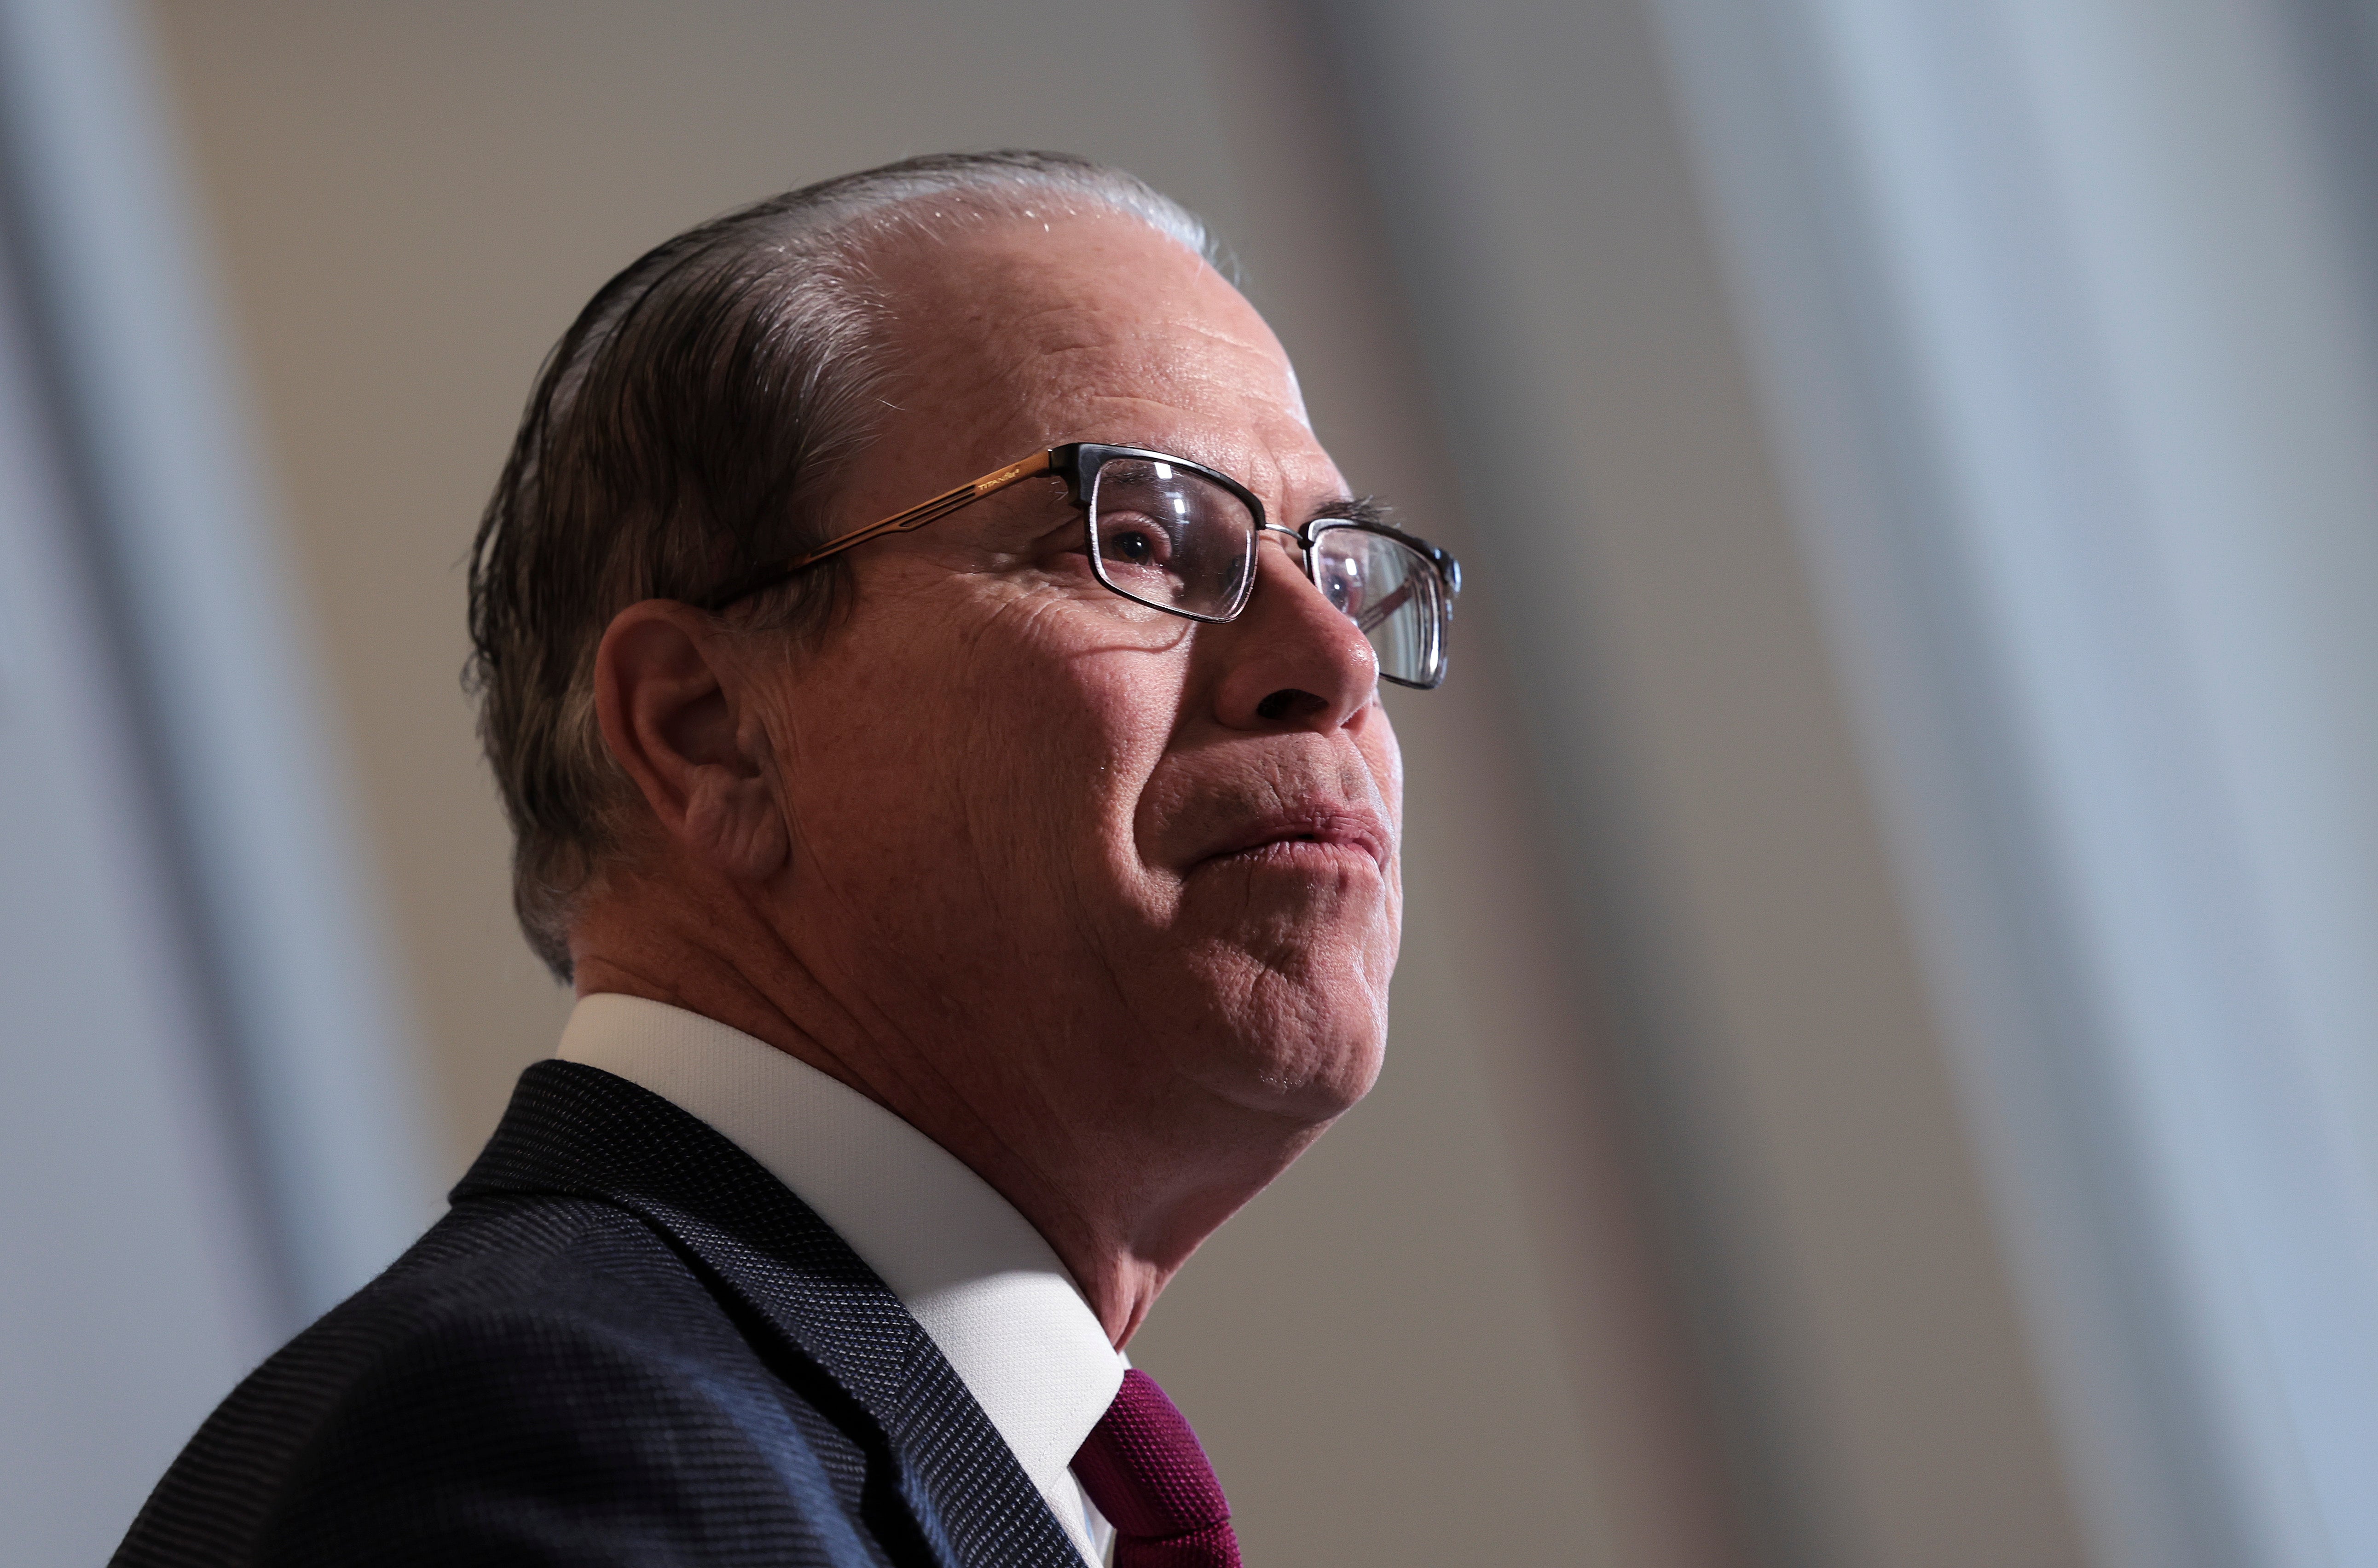 US Sen Mike Braun (R-IN) speaks on southern border security during a press conference at the Russell Senate Office Building on 2 February 2022 in Washington, DC